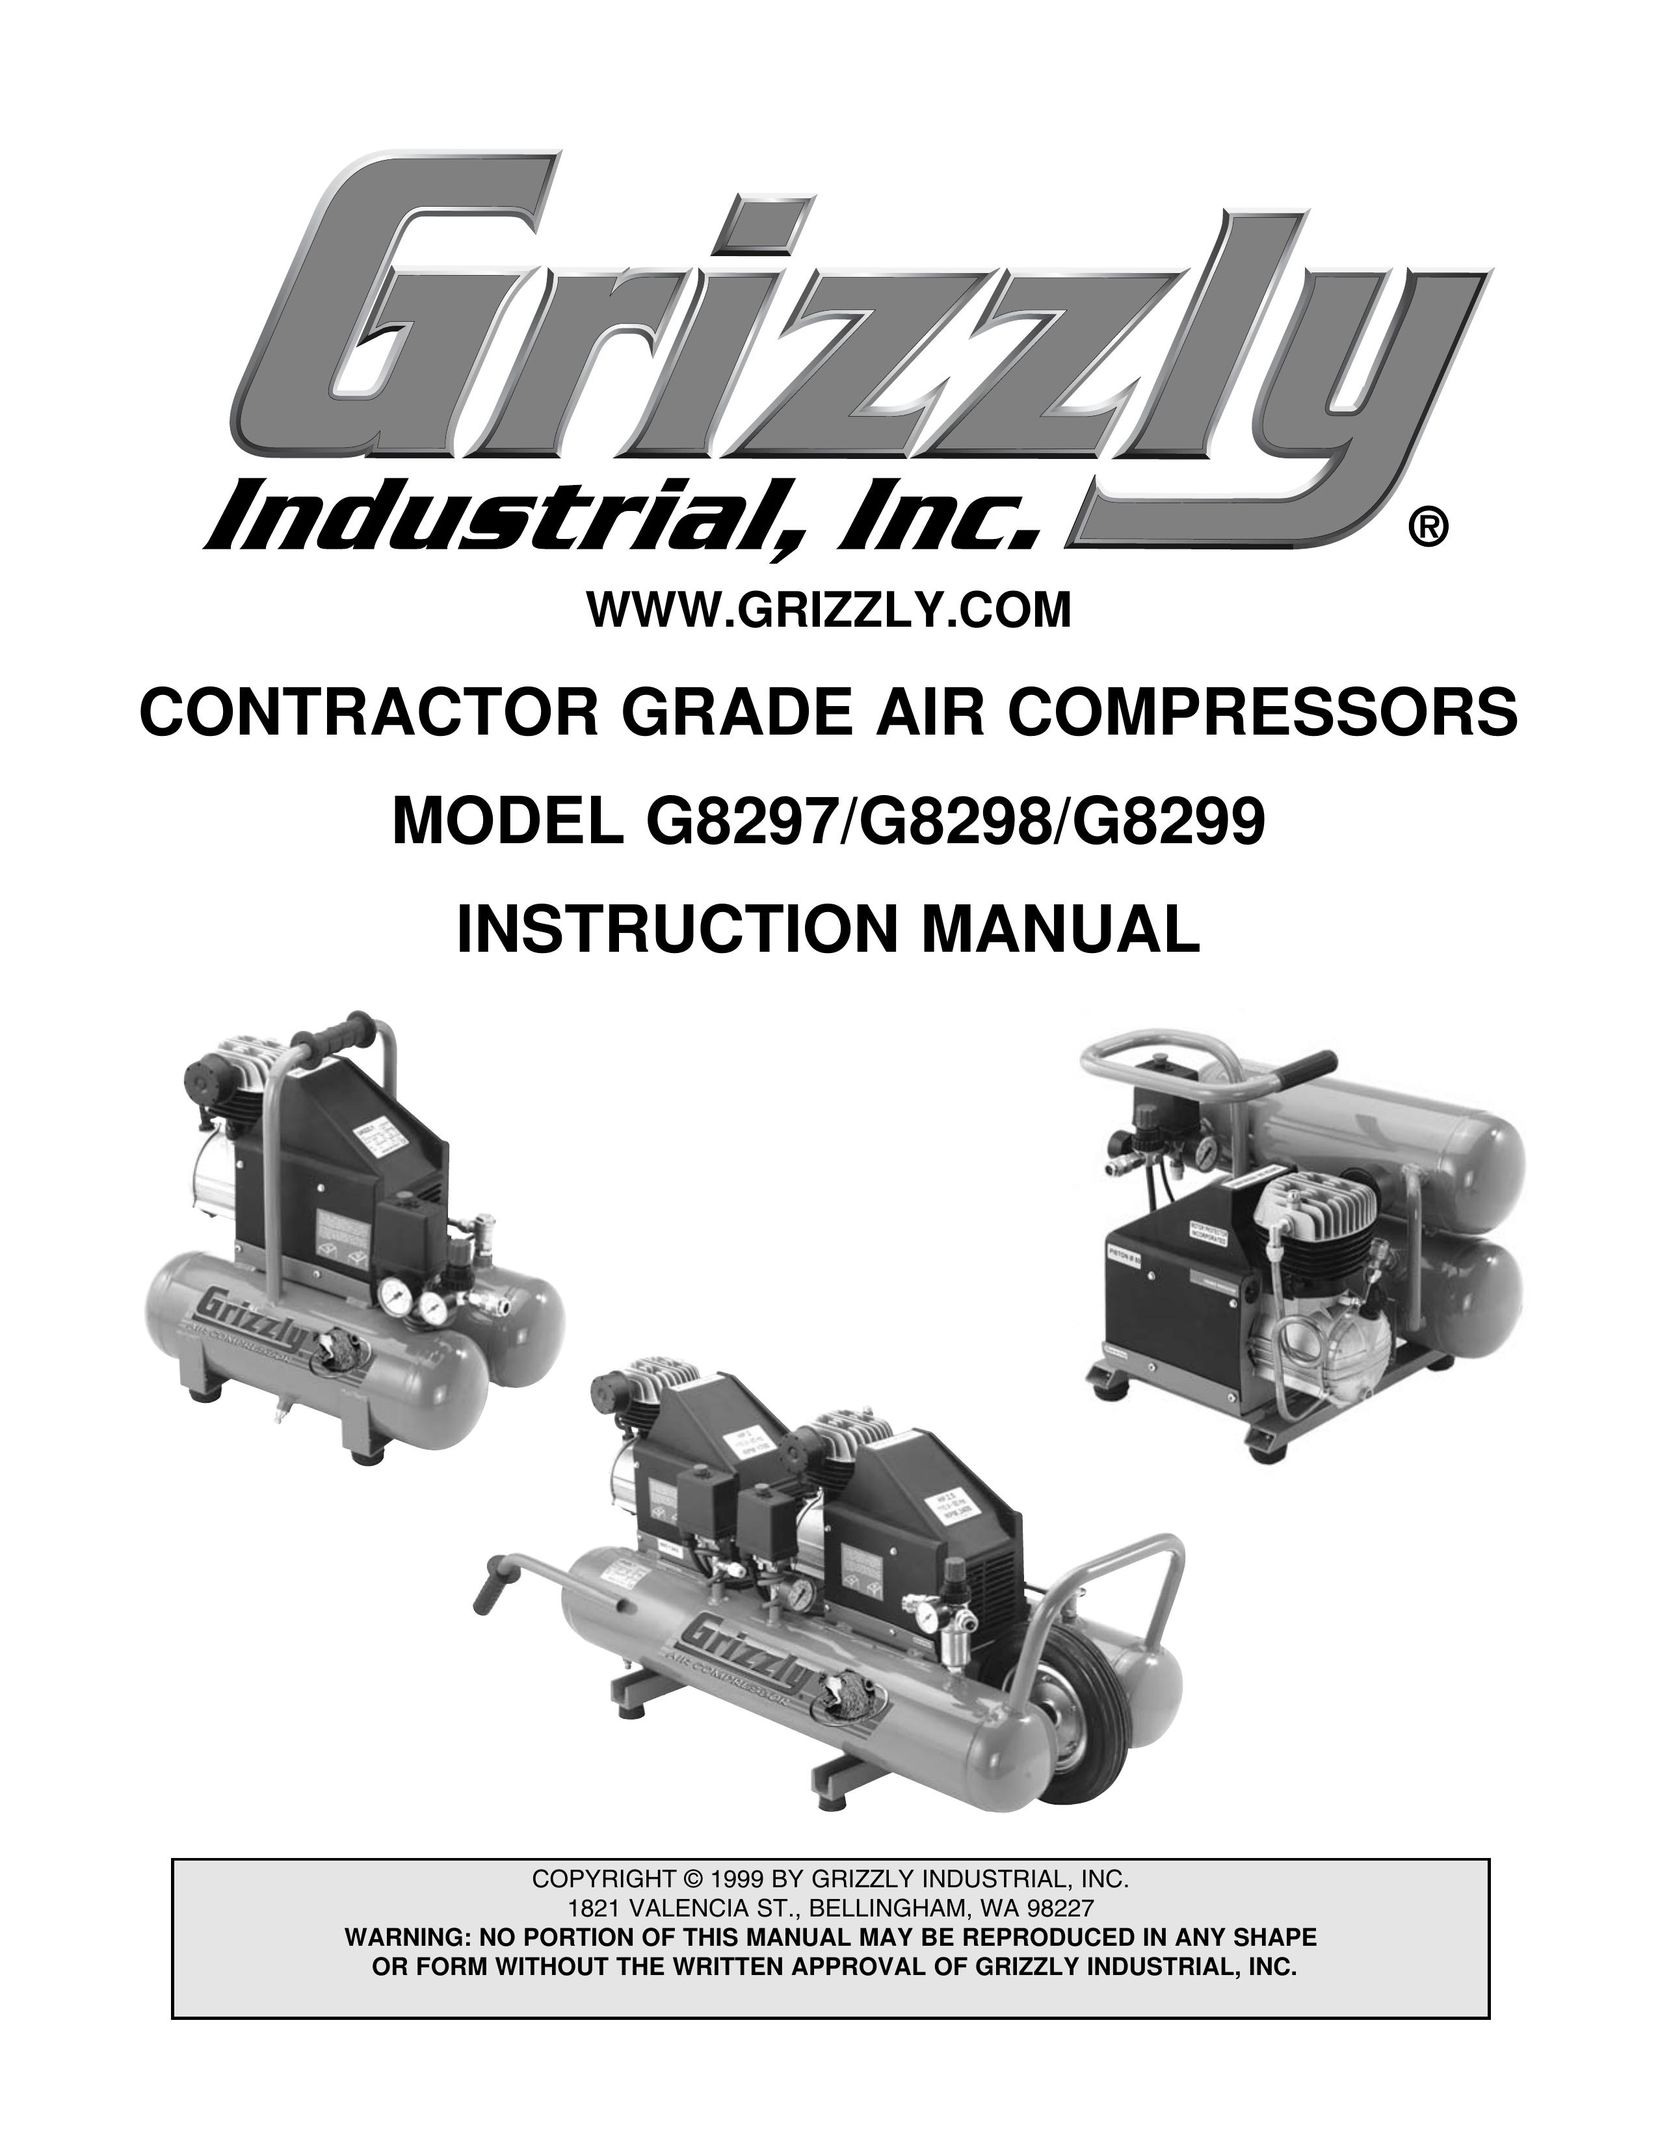 Grizzly G8299 Air Compressor User Manual